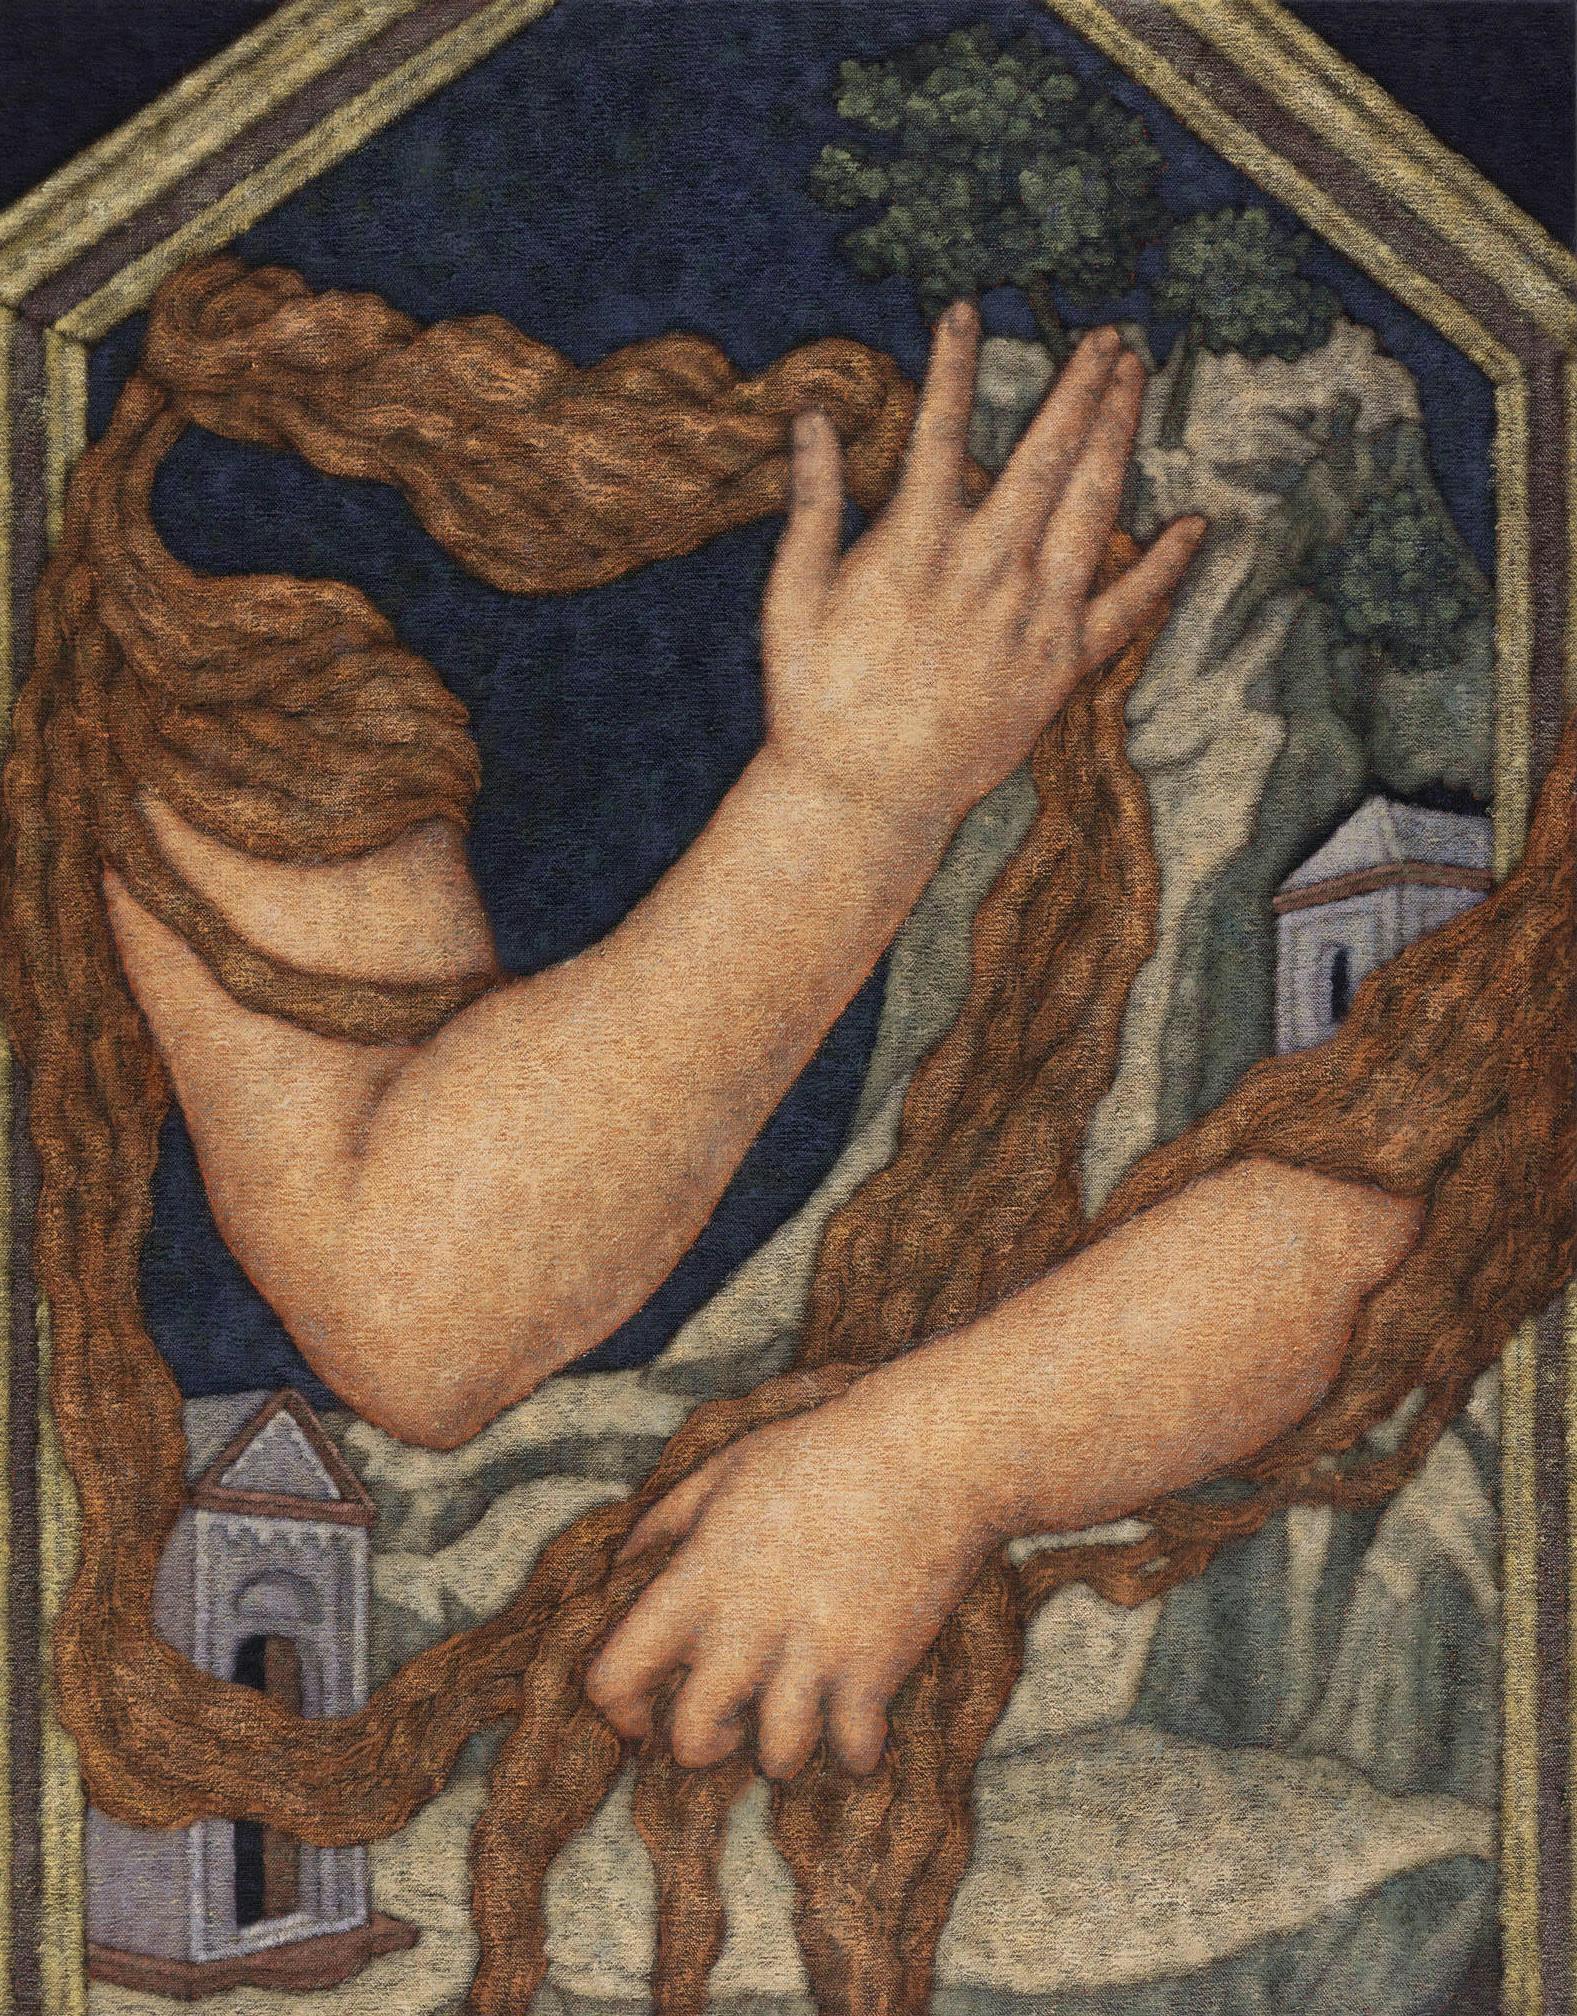 A detail of a painting by Jennifer Carvalho of two hands grasping onto long tangled lengths of hair against the backdrop of a rocky landscape with two small structures